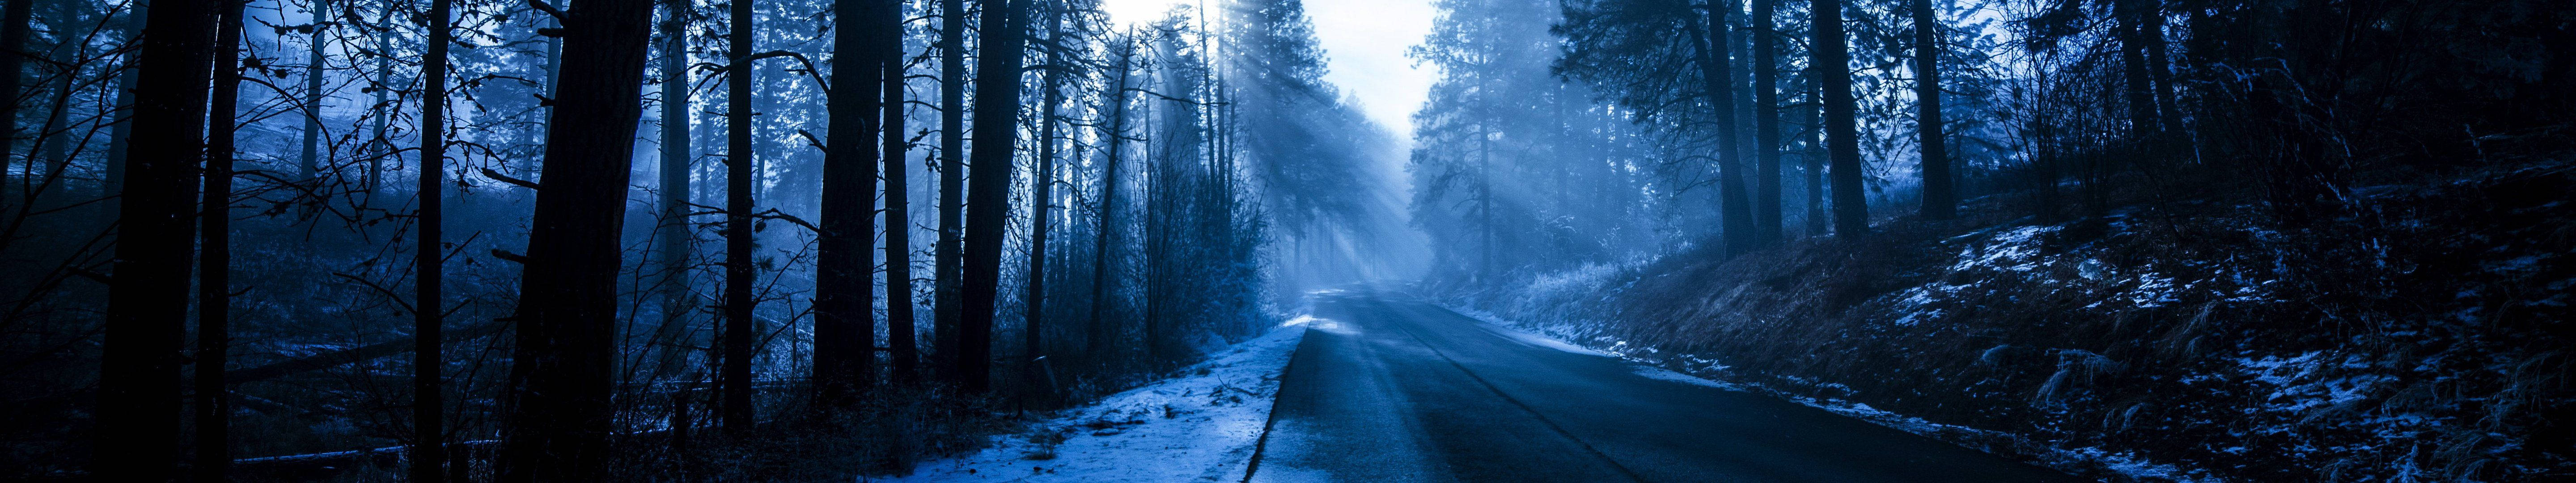 Blue Aesthetic Forest Road Background